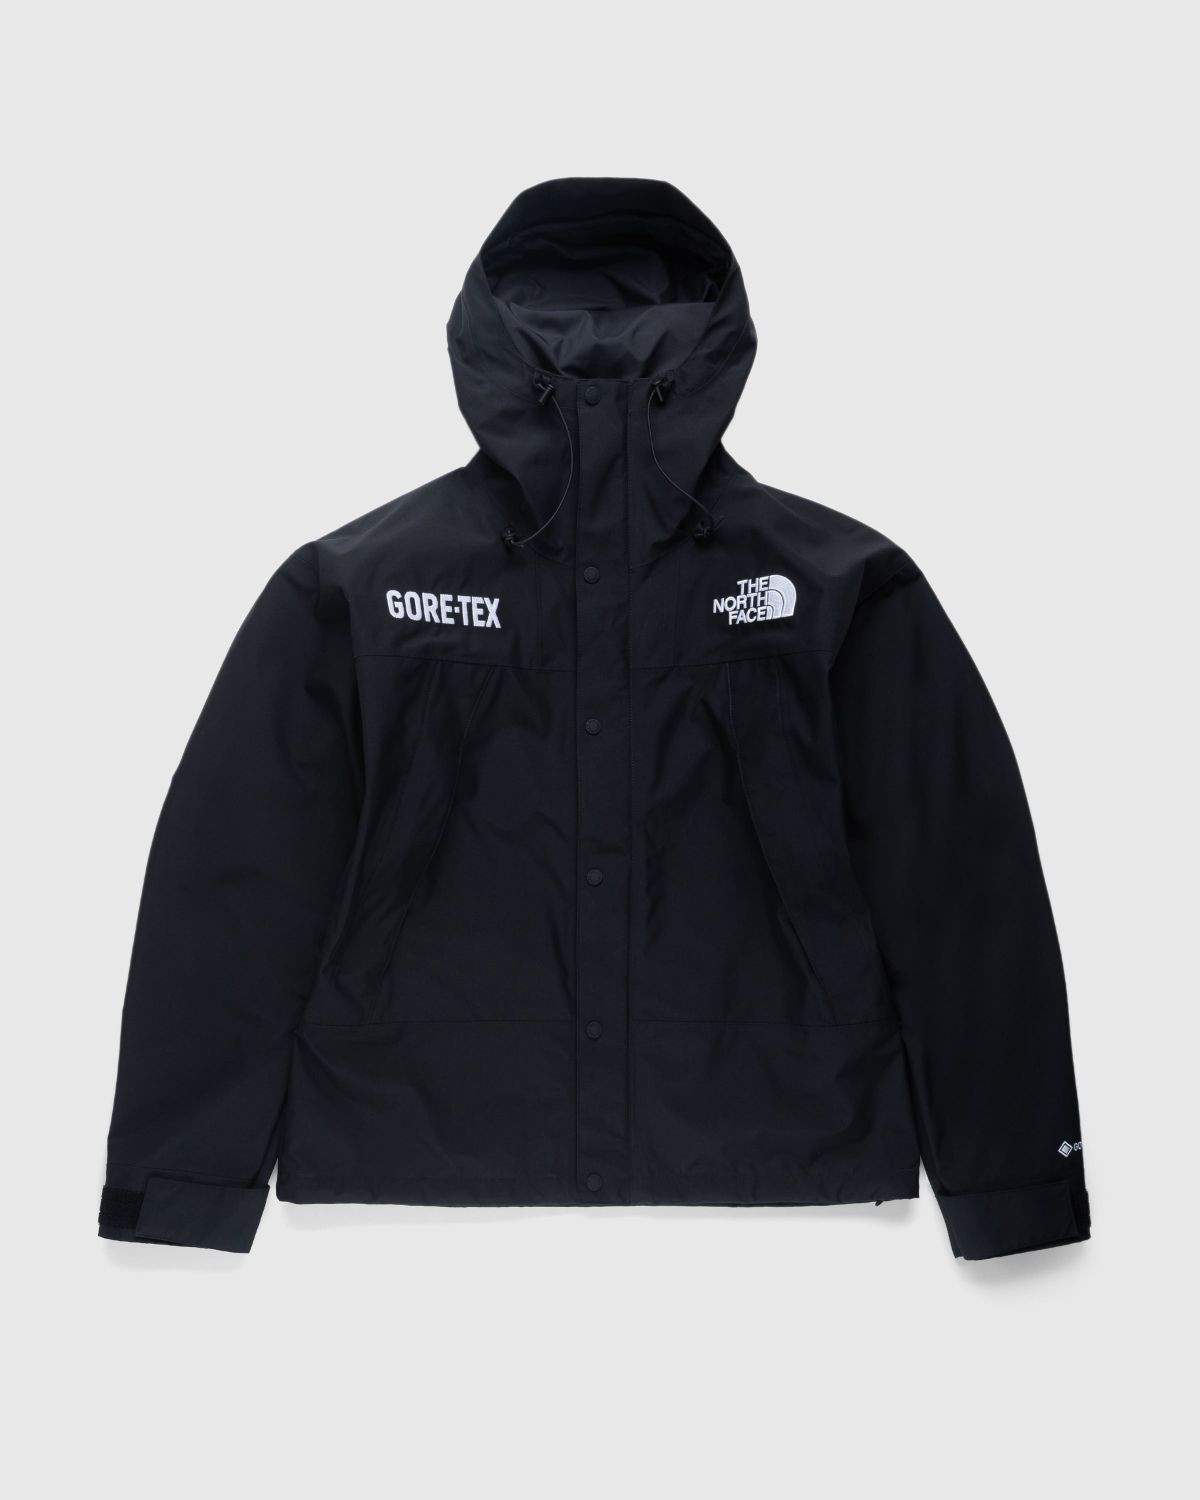 The North Face – Gore-Tex Mountain Jacket Black | Highsnobiety Shop